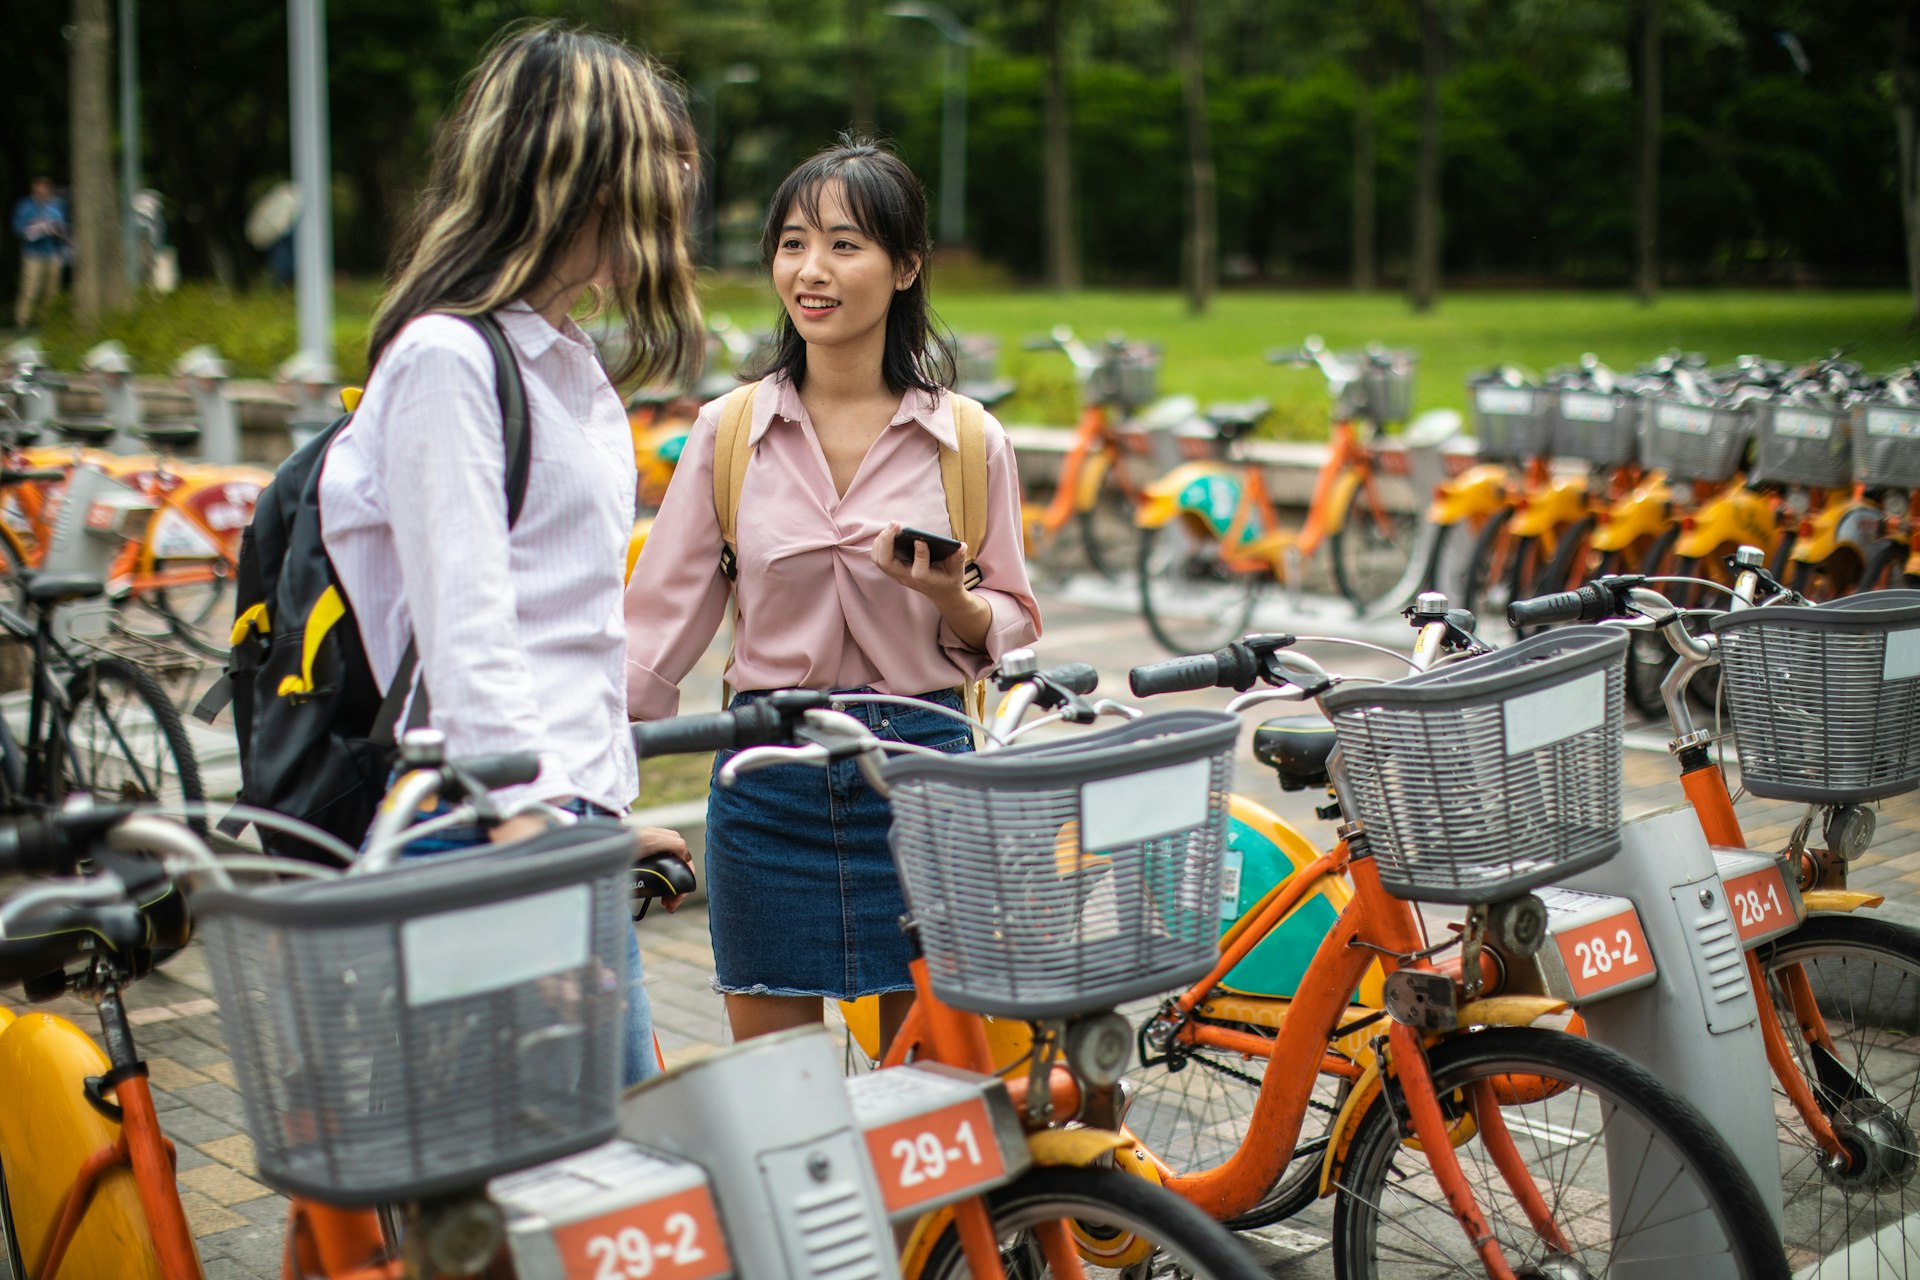 Two young women renting bikes together in a park in Taipei, Taiwan